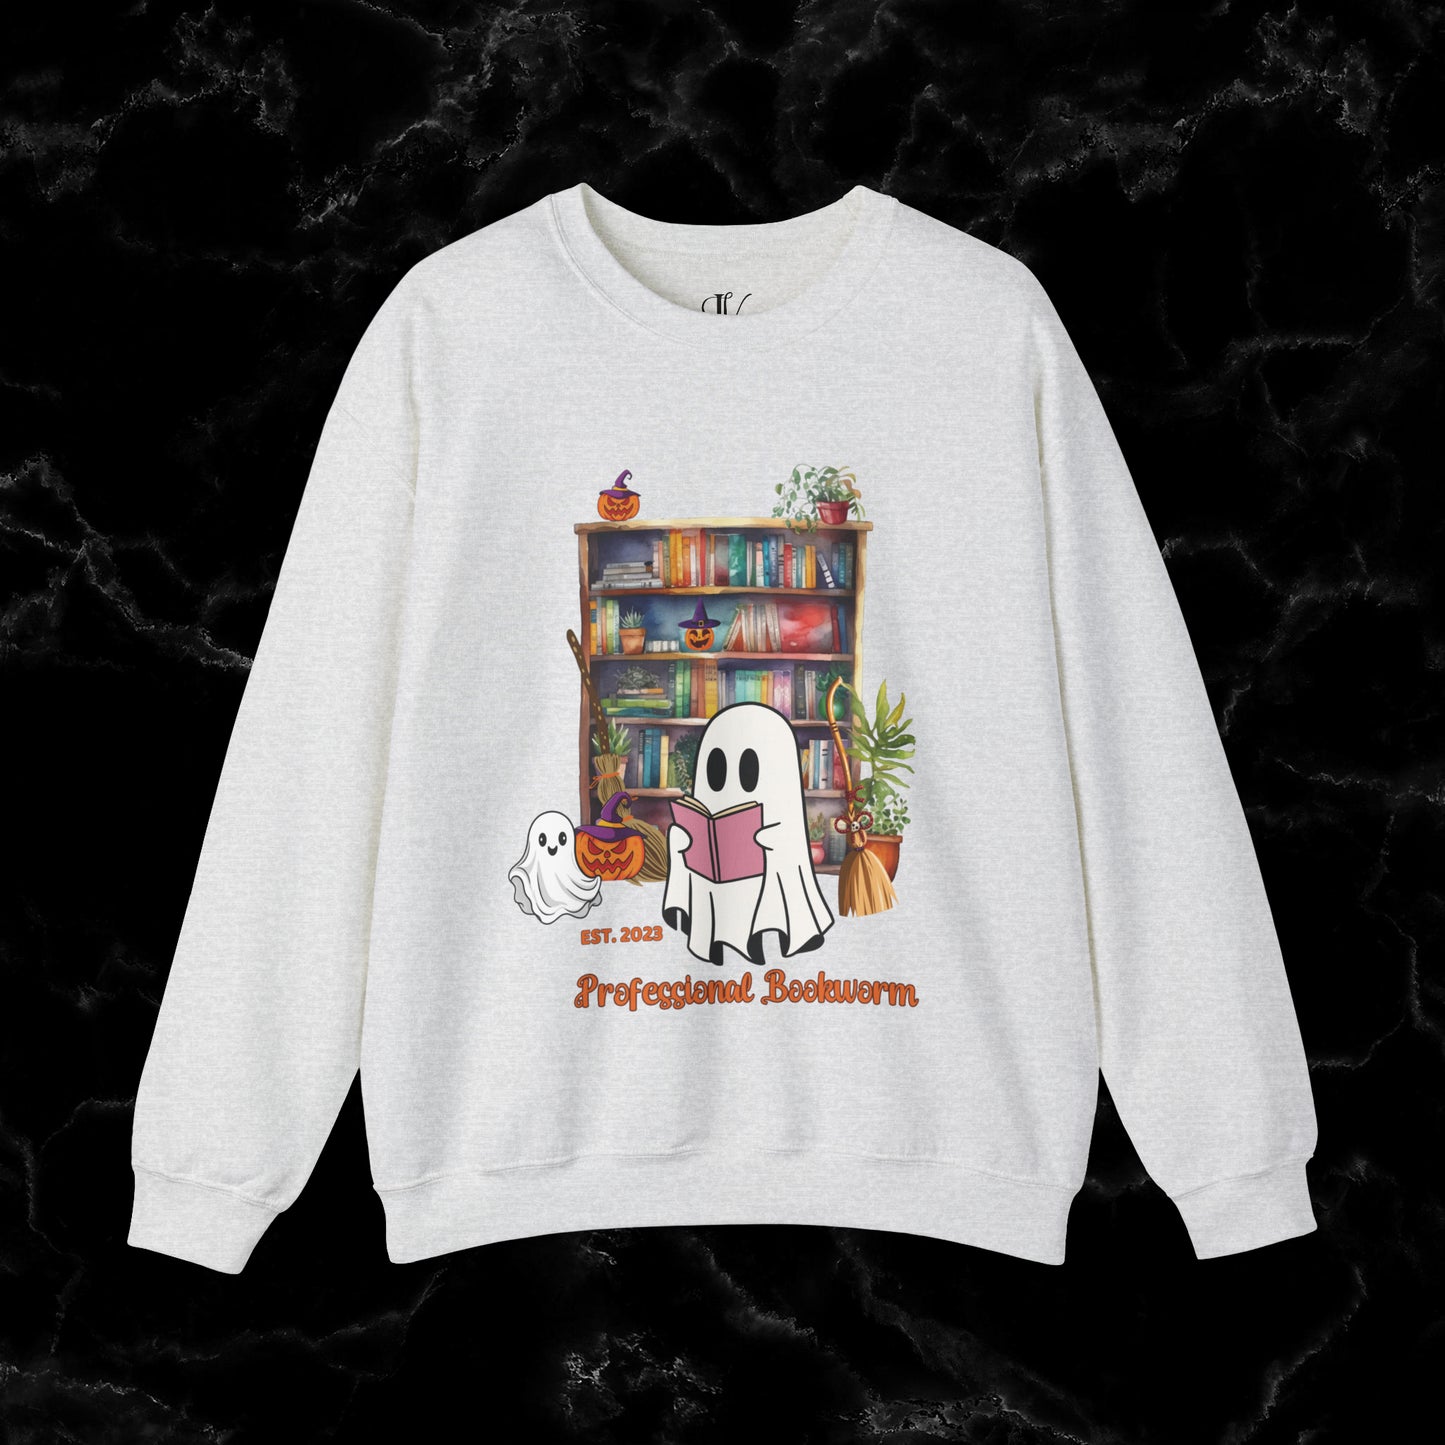 Witchy Gifts for Book Lover Cottagecore Pumpkin Witch Sweatshirt - Bookworm Back To School Reading Fall Sweater, Perfect Present for Bookworm Aunt's Birthday Sweatshirt S Ash 